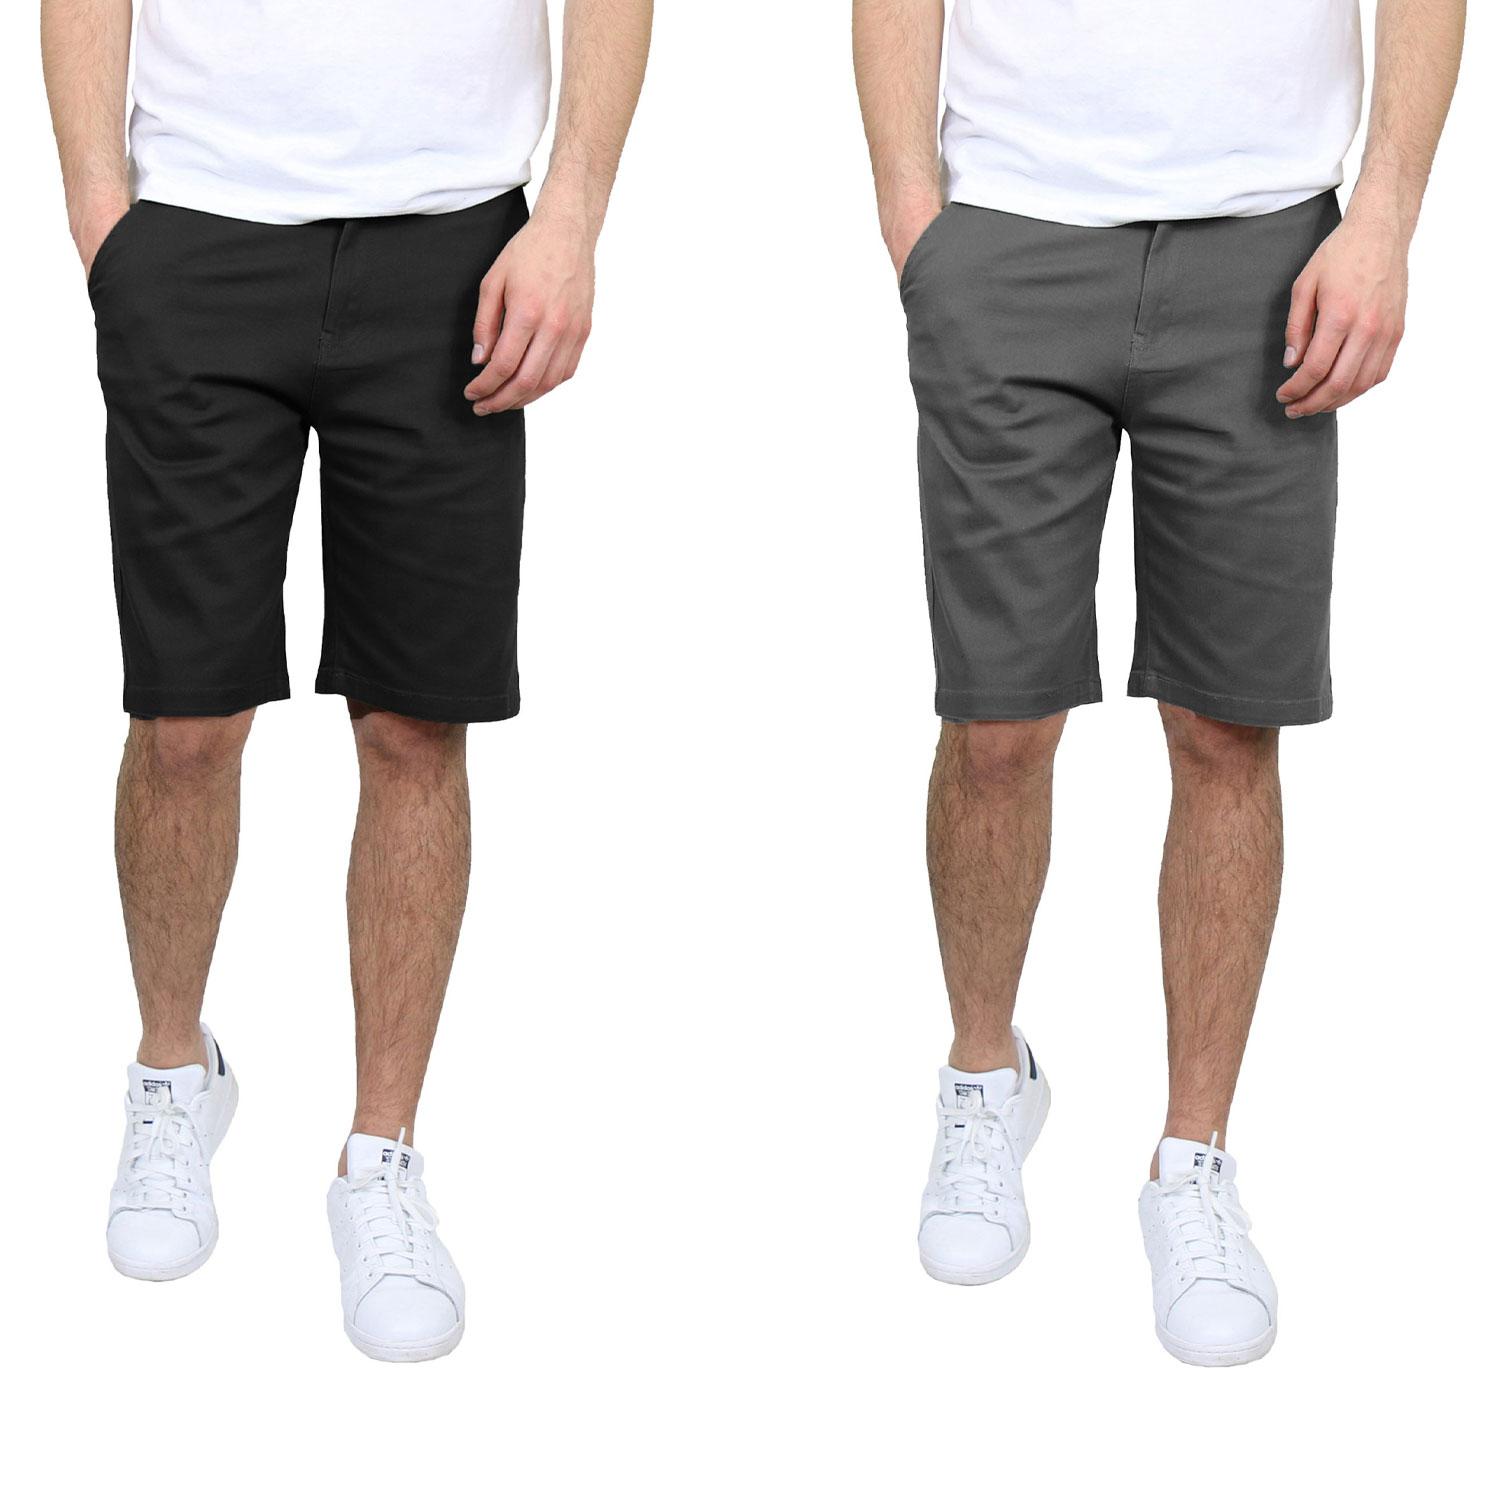 2 Pack Men's 5 Pocket Flat Front Slim-Fit Stretch Chino Shorts